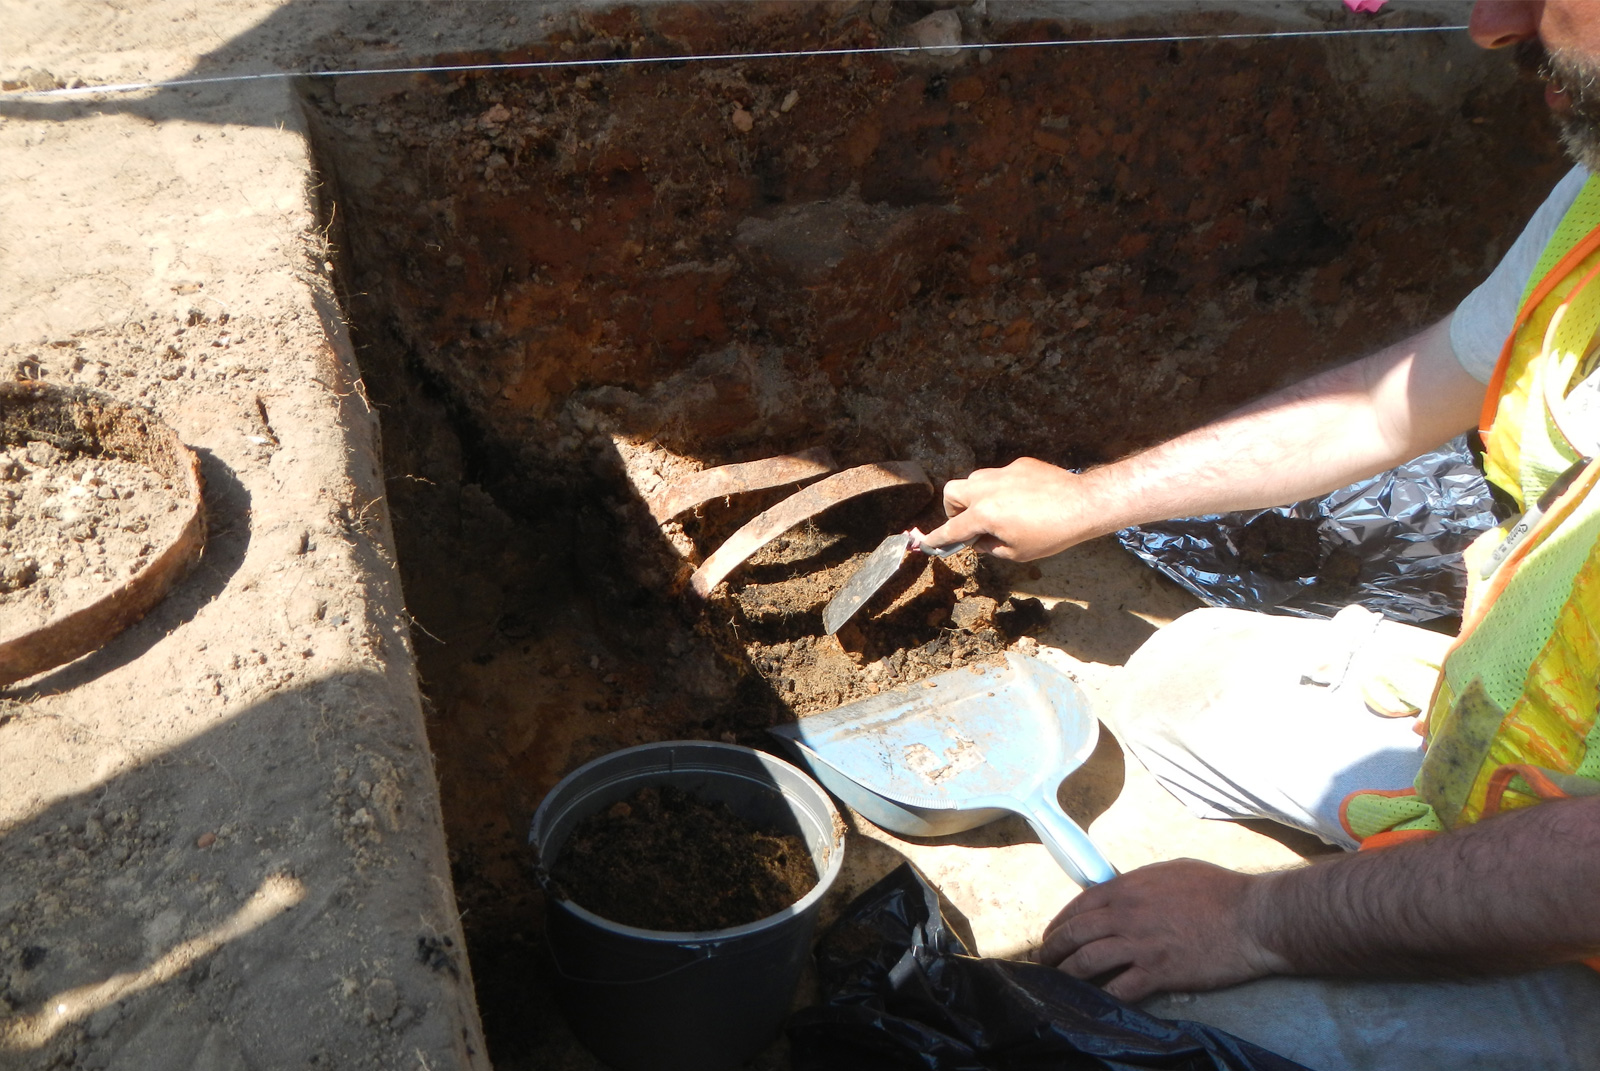 Crewmember uncovering rusted metal pieces while performing excavation.